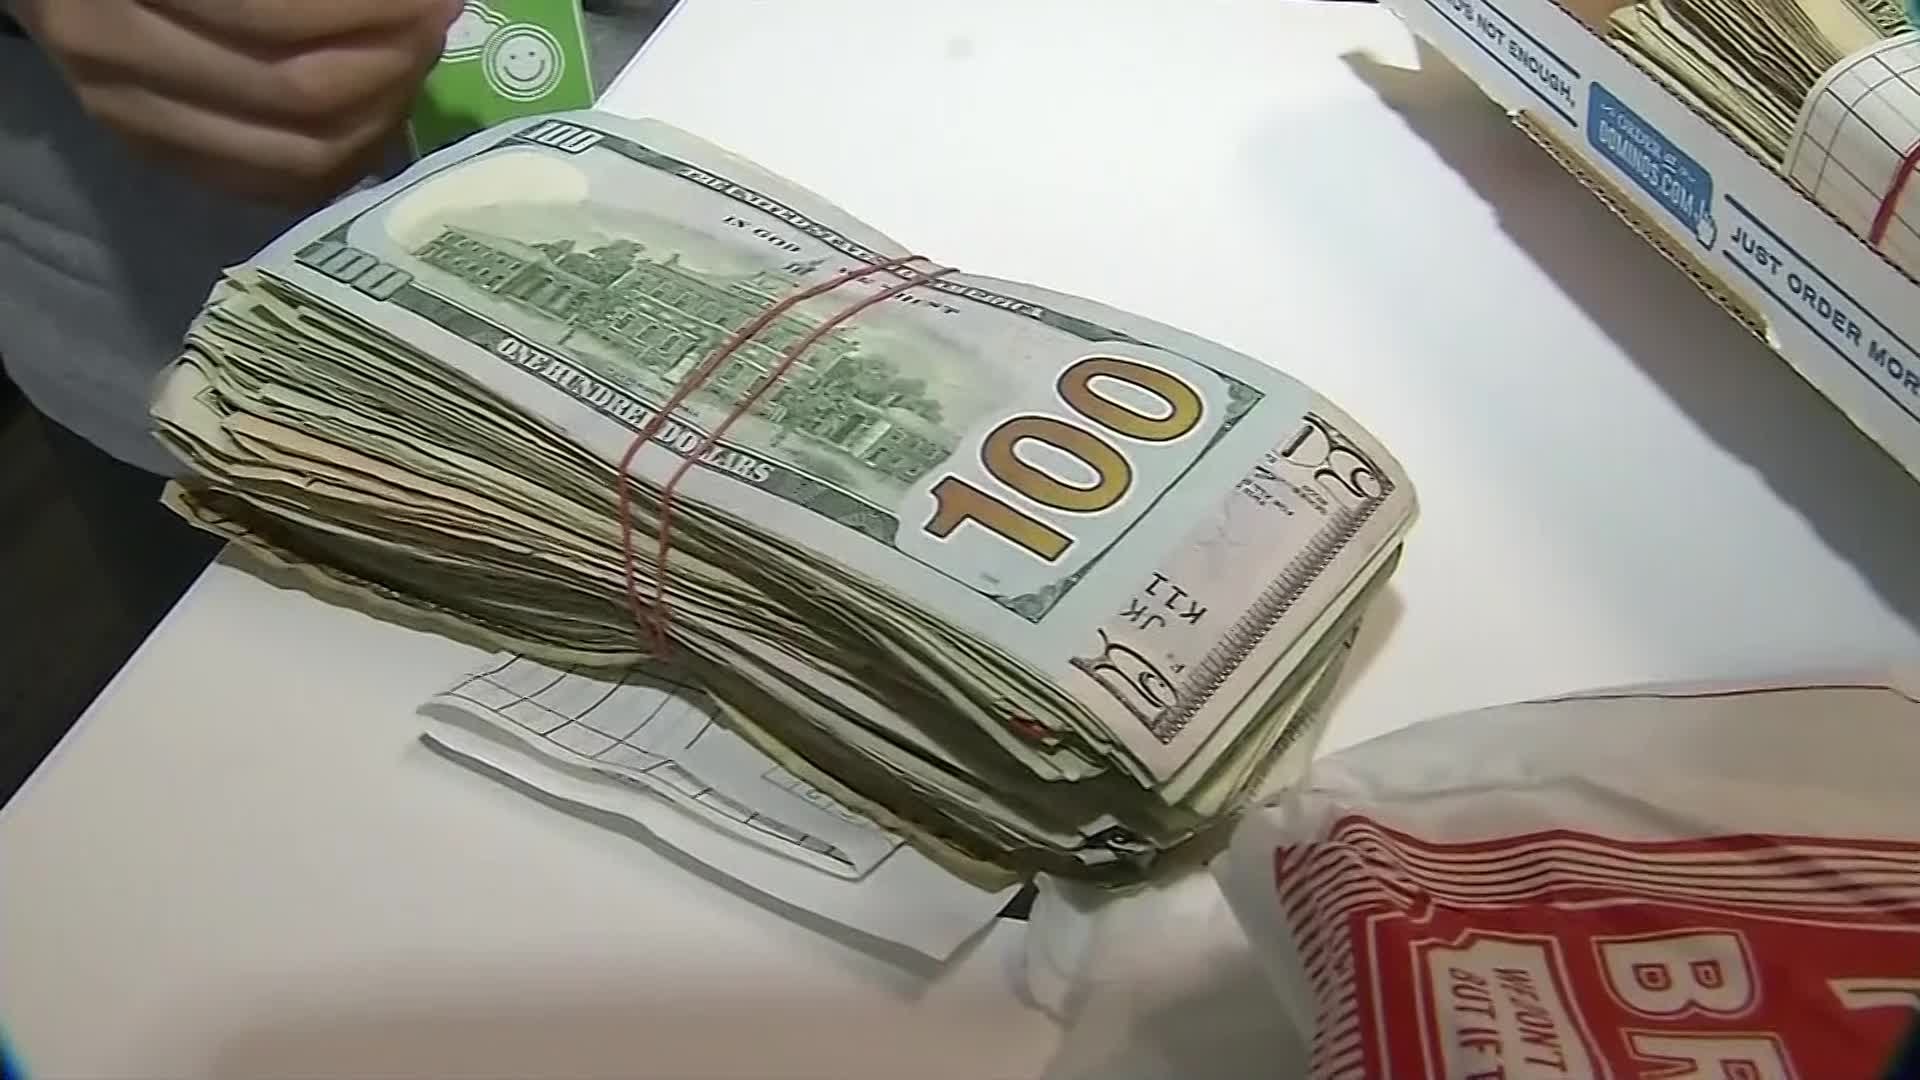 Stack of money delivered in pizza box - YouTube